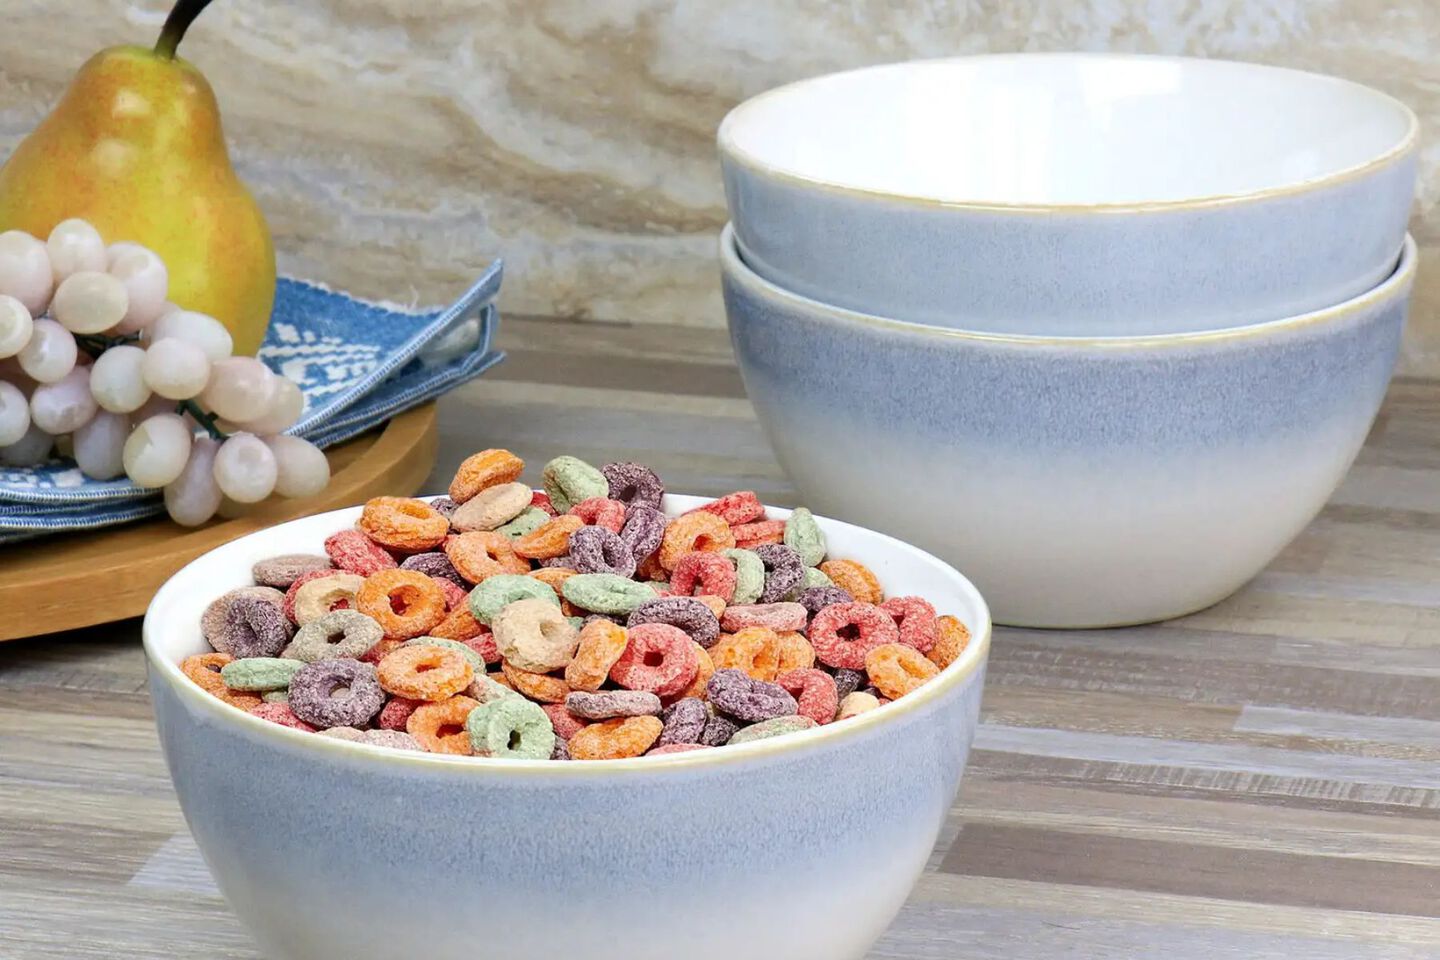 Countertop with three light blue and white ceramic bowls, one filled with cereal